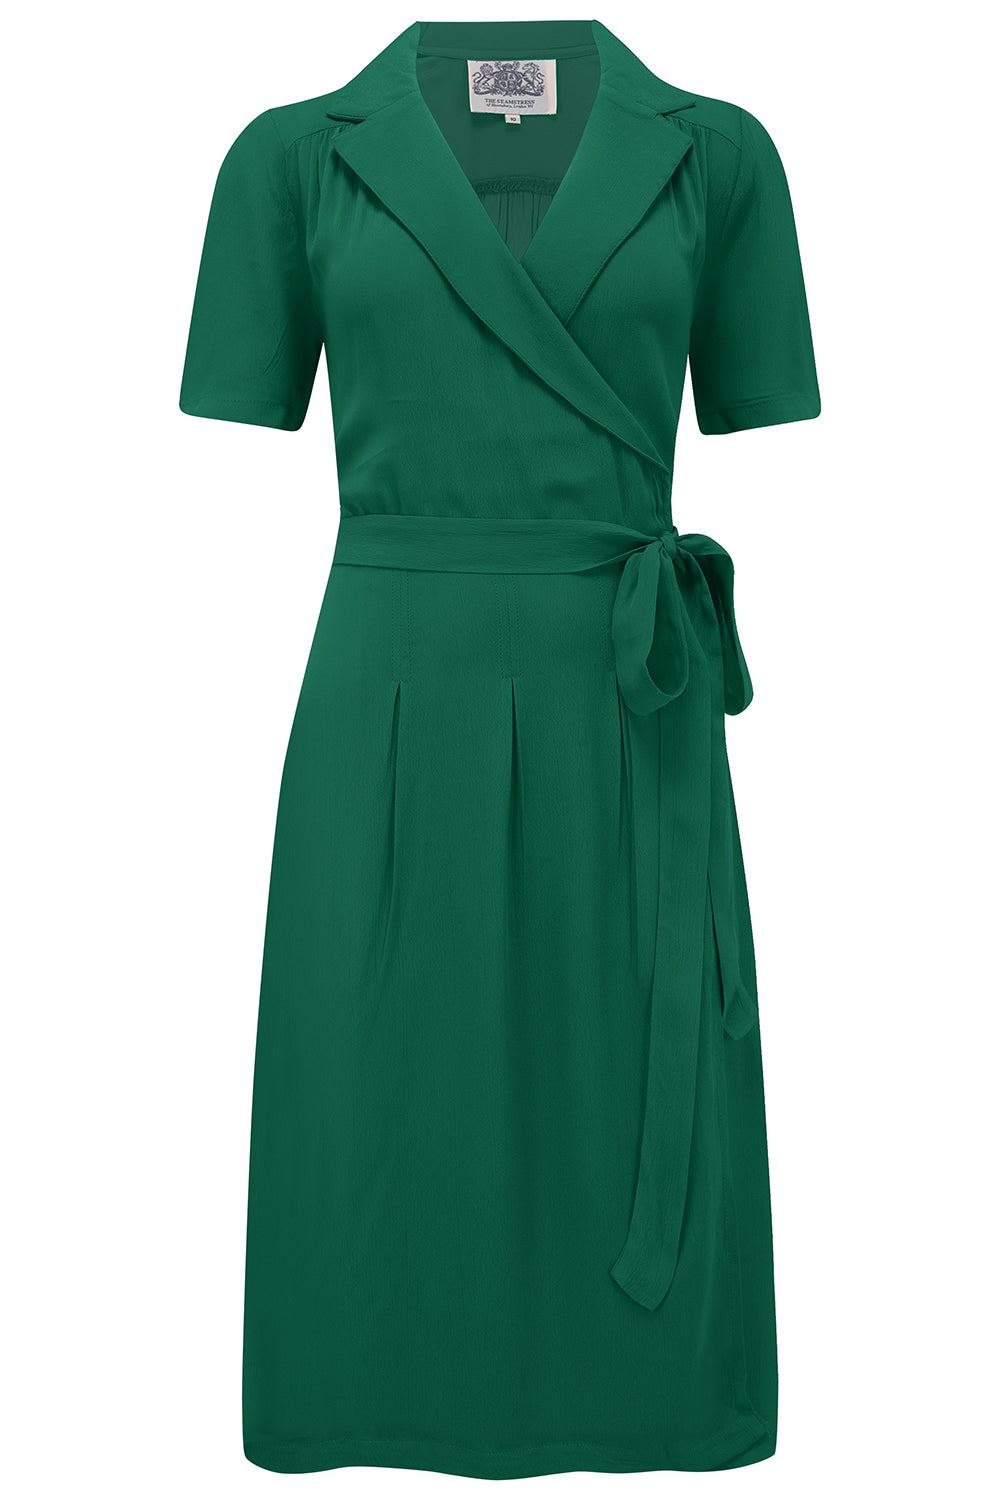 "Peggy" Wrap Dress in Vintage Green, Authentic Late 1940s Vintage Style - True and authentic vintage style clothing, inspired by the Classic styles of CC41 , WW2 and the fun 1950s RocknRoll era, for everyday wear plus events like Goodwood Revival, Twinwood Festival and Viva Las Vegas Rockabilly Weekend Rock n Romance The Seamstress of Bloomsbury